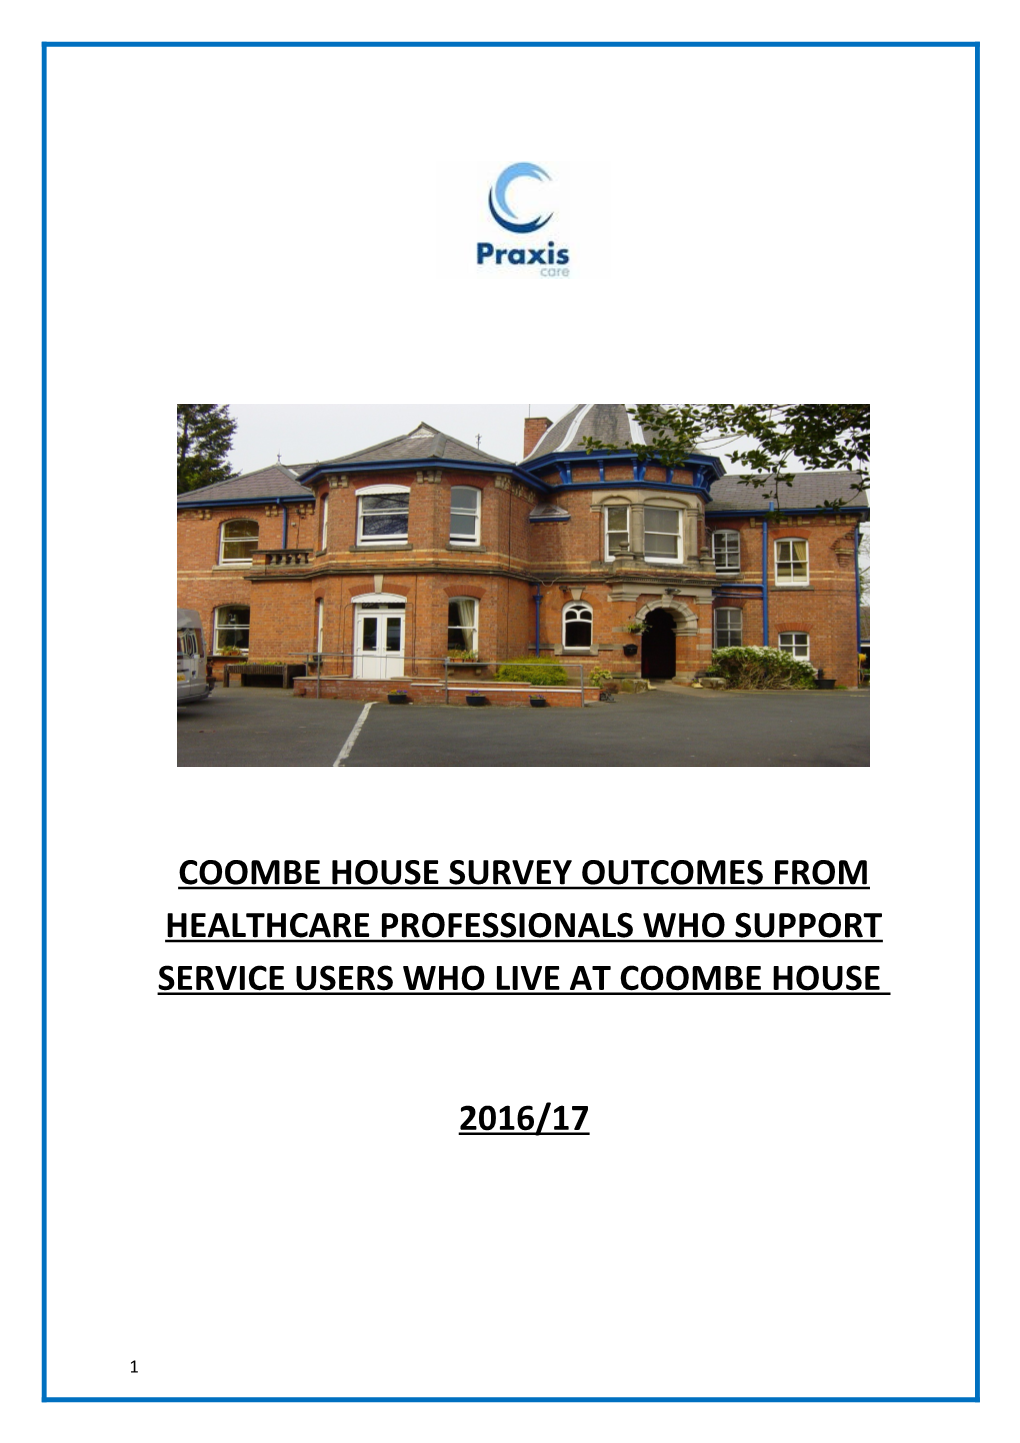 Coombe House Survey Outcomes from Healthcare Professionals Who Support Service Users Who